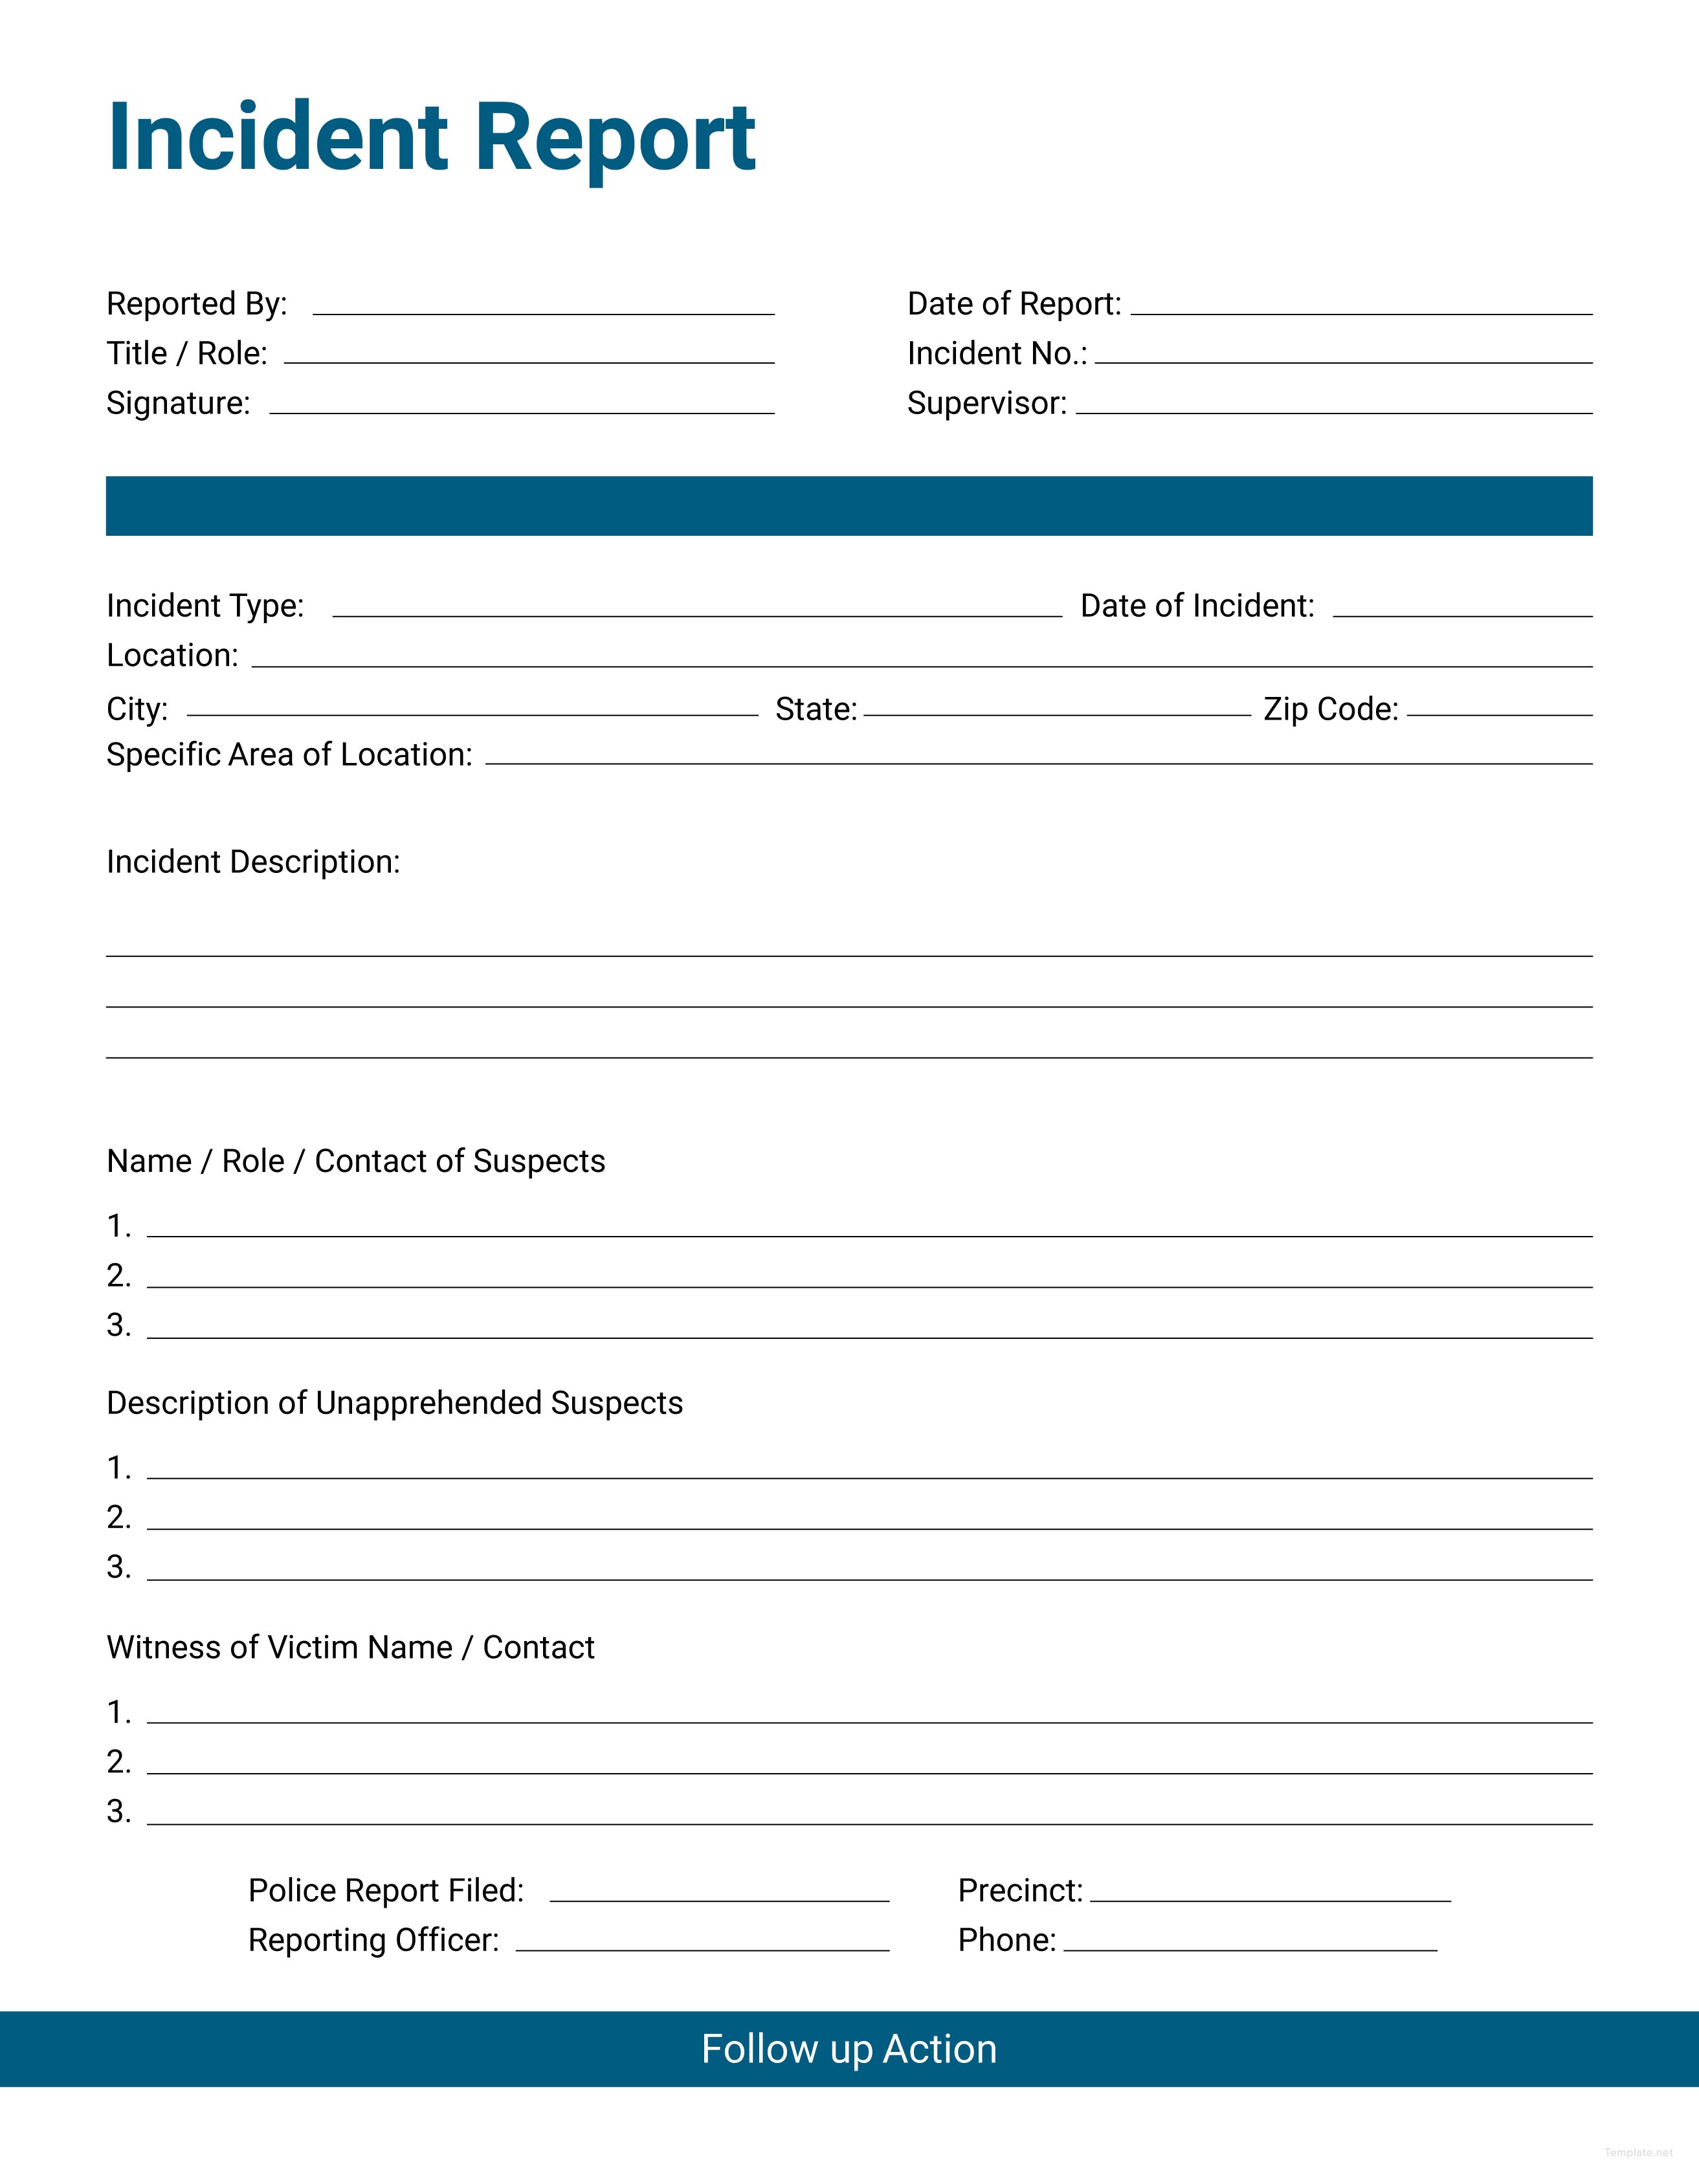 Free Incident Report Template in Adobe Illustrator Template net